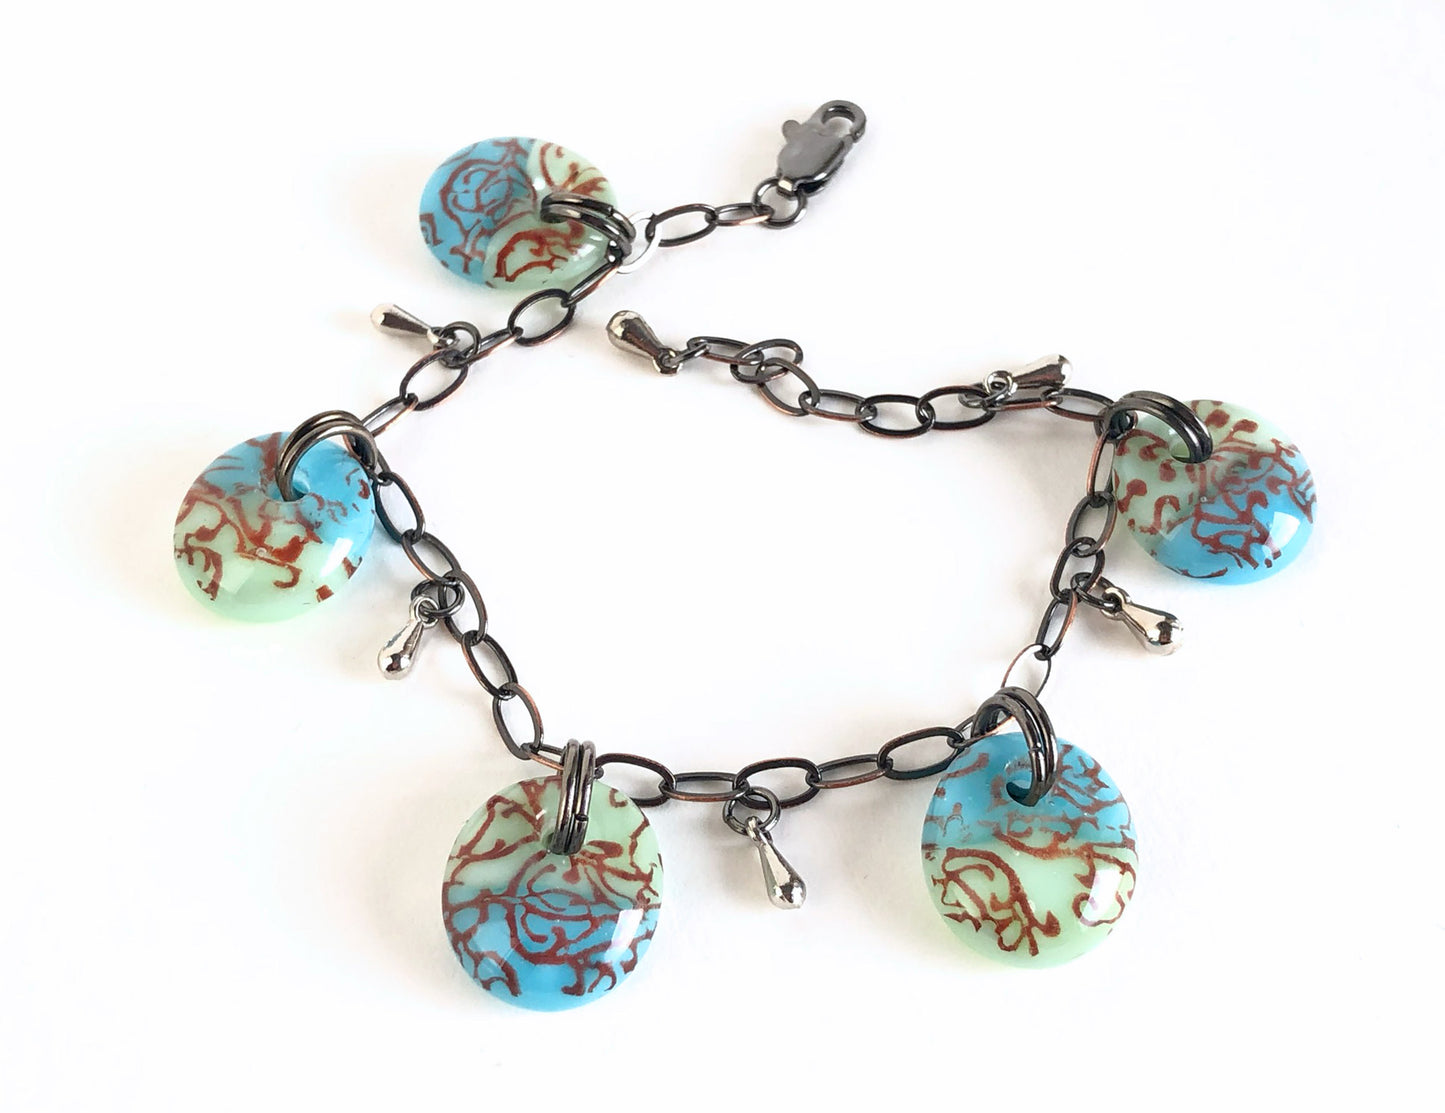 One of a kind fused glass charm bracelet with antiqued bronze chain and stainless steel teardrop beads.